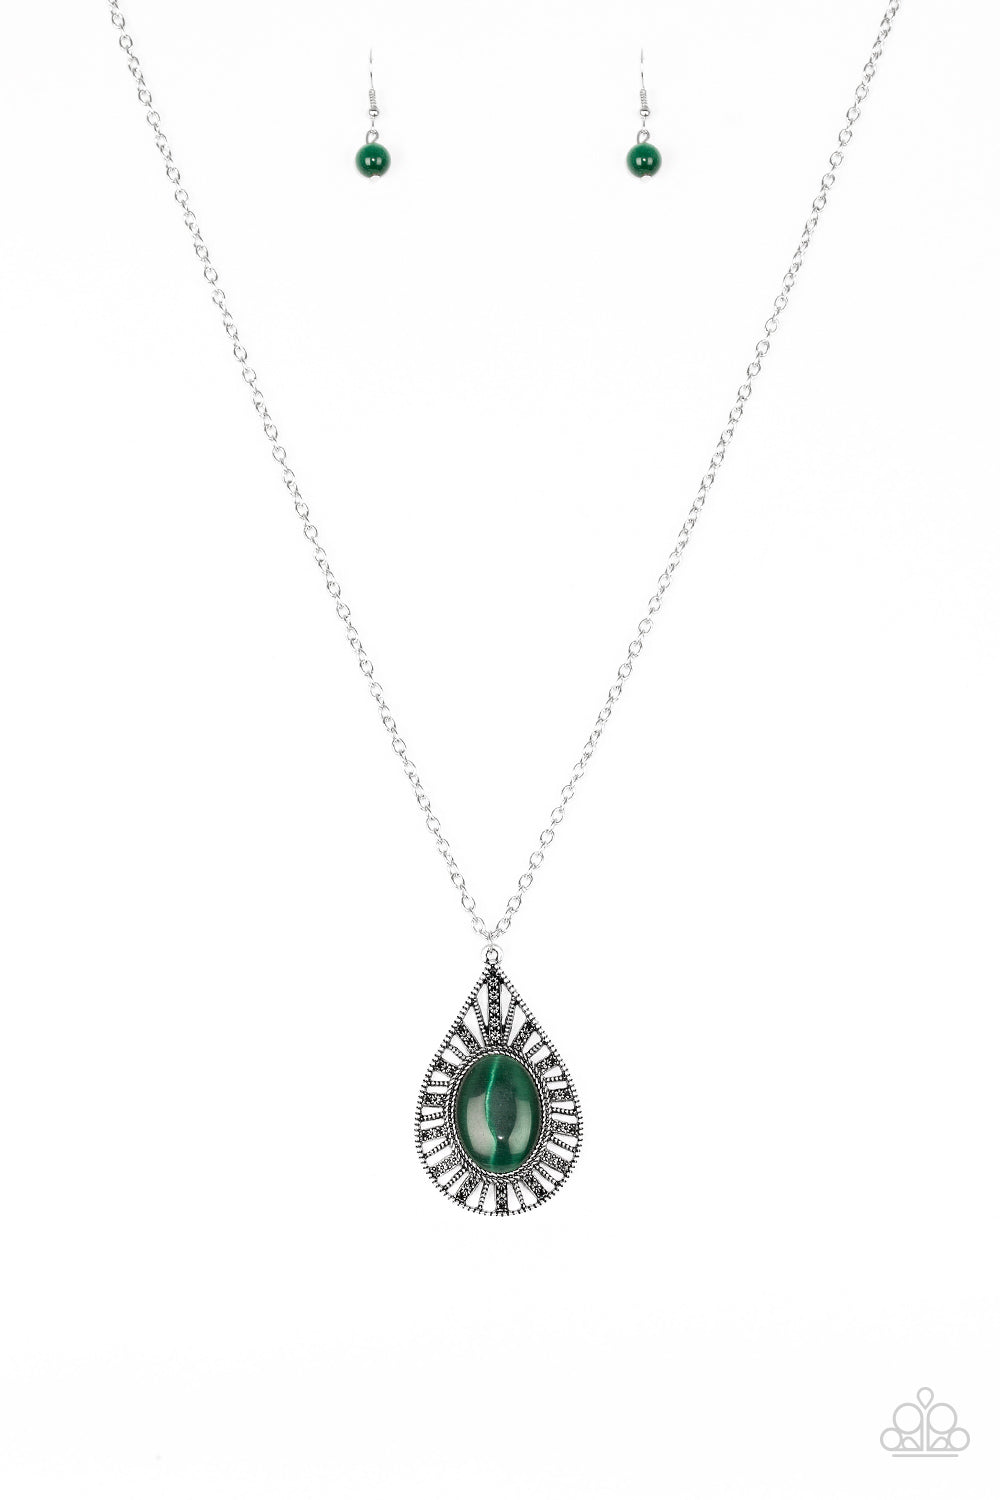 Total Tranquility - Green Necklace